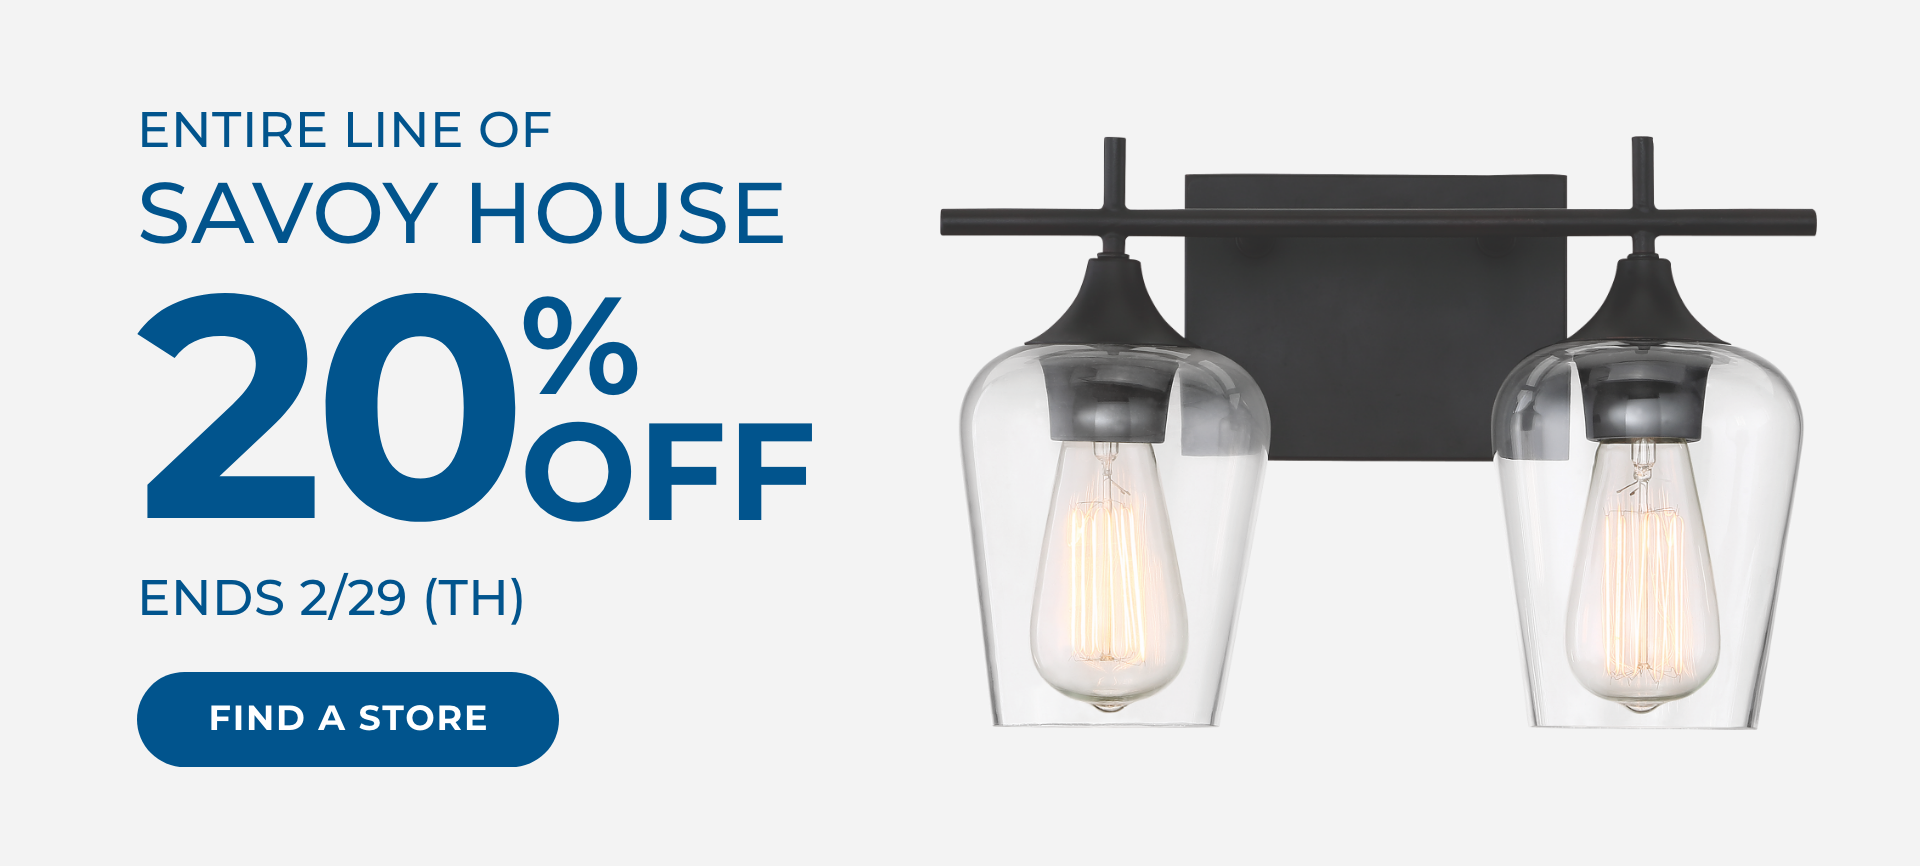 Save 20% on the entire line of Savoy House. Ends 2/29.